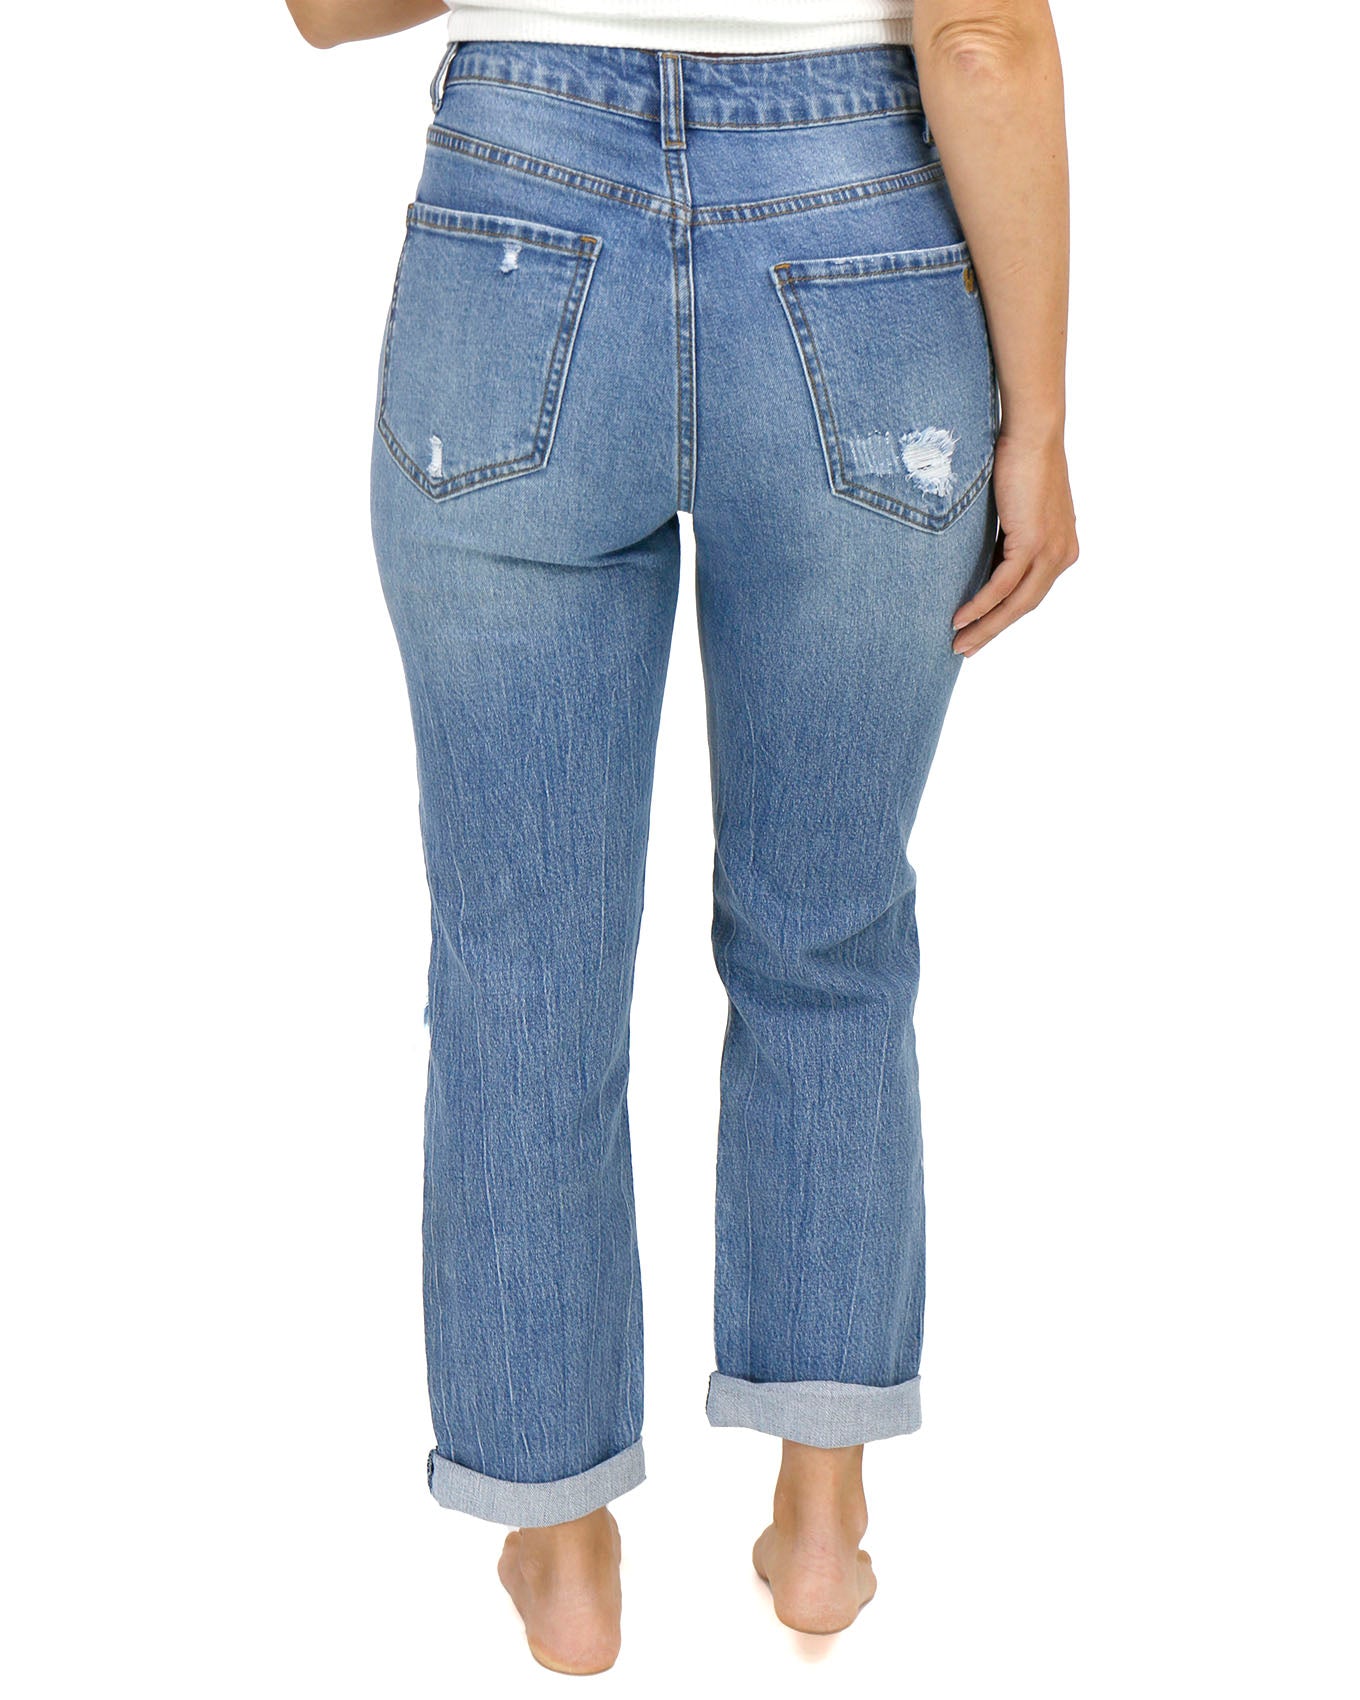 Back stock shot of Mid-Wash Distressed High Rise Girlfriend Jeans